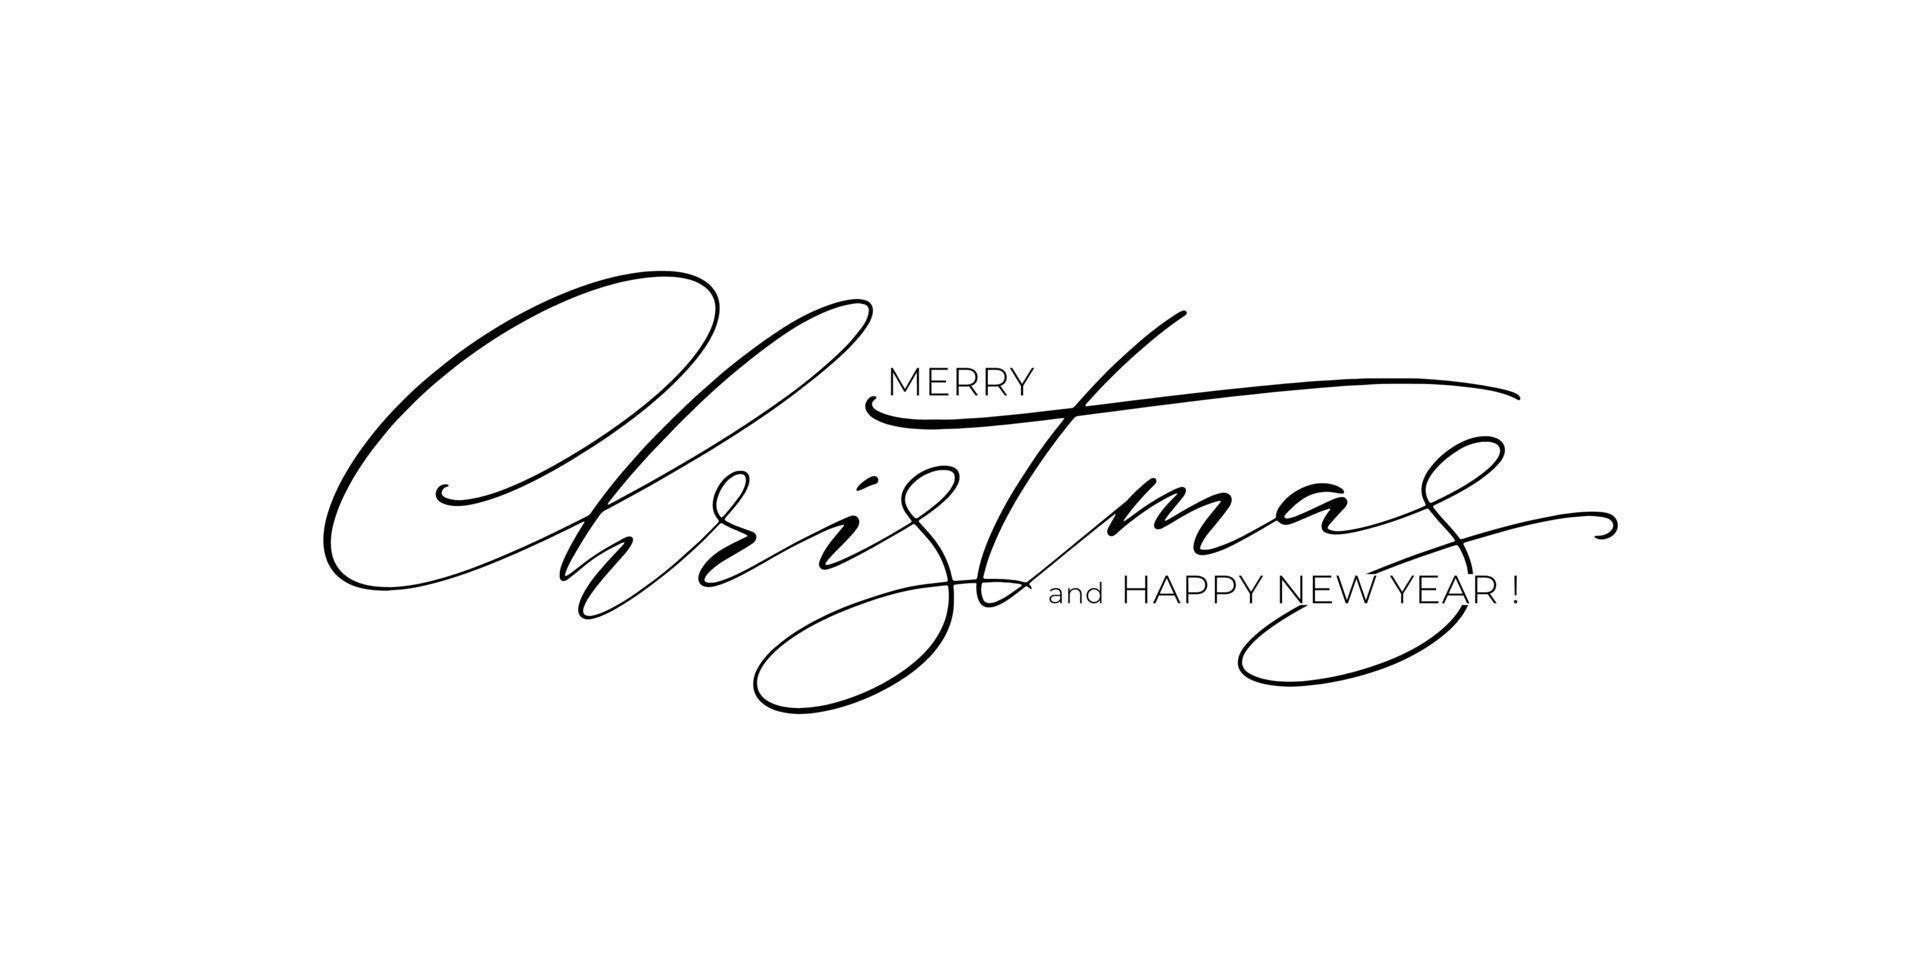 Merry Christmas and Happy New Year lettering template. Monochrome elegant greeting card or invitation. vector